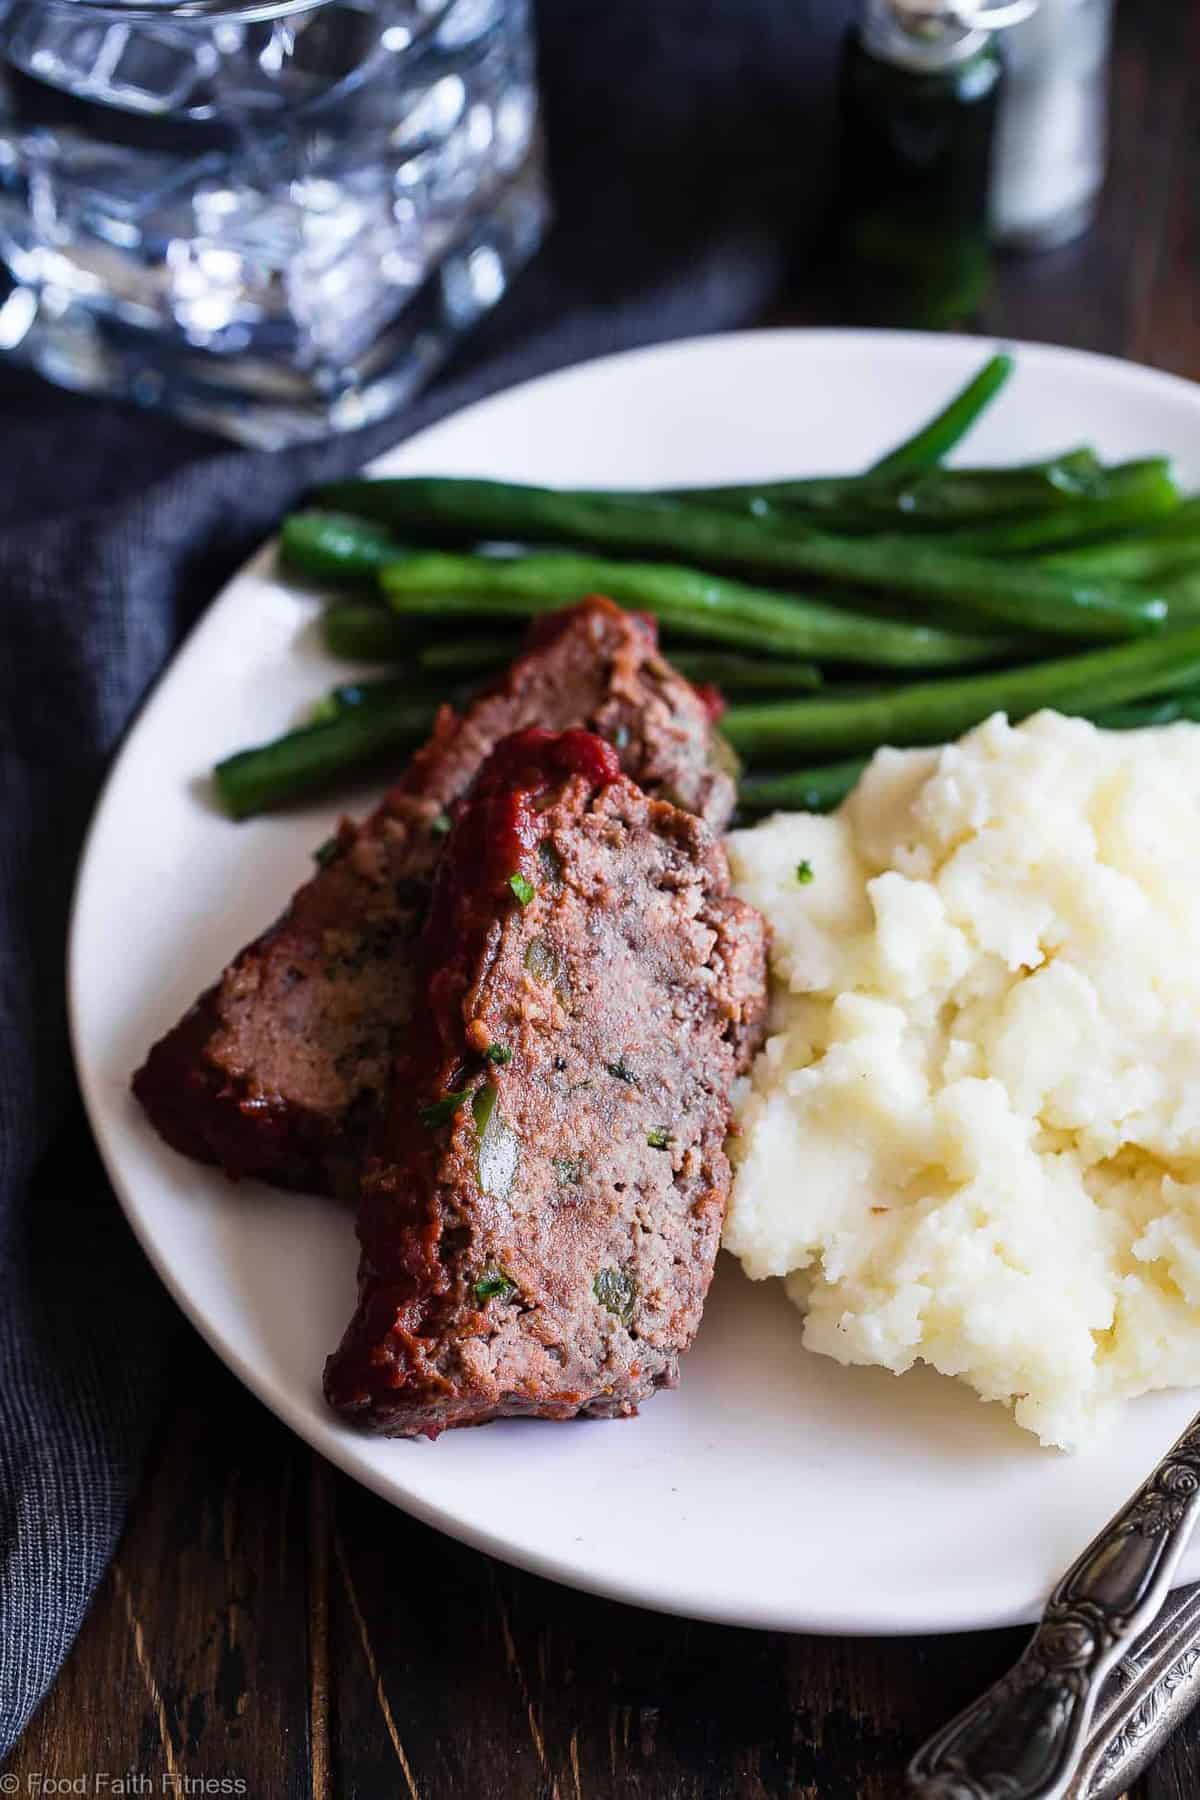 Easy Low Carb Paleo Meatloaf - This healthy Paleo Meatloaf is a family-friendly weeknight dinner that's gluten/grain/dairy/sugar free and whole30 compliant! Only 210 calories and picky eater approved! | #Foodfaithfitness | #Paleo #Whole30 #Keto #Glutenfree #LowCarb